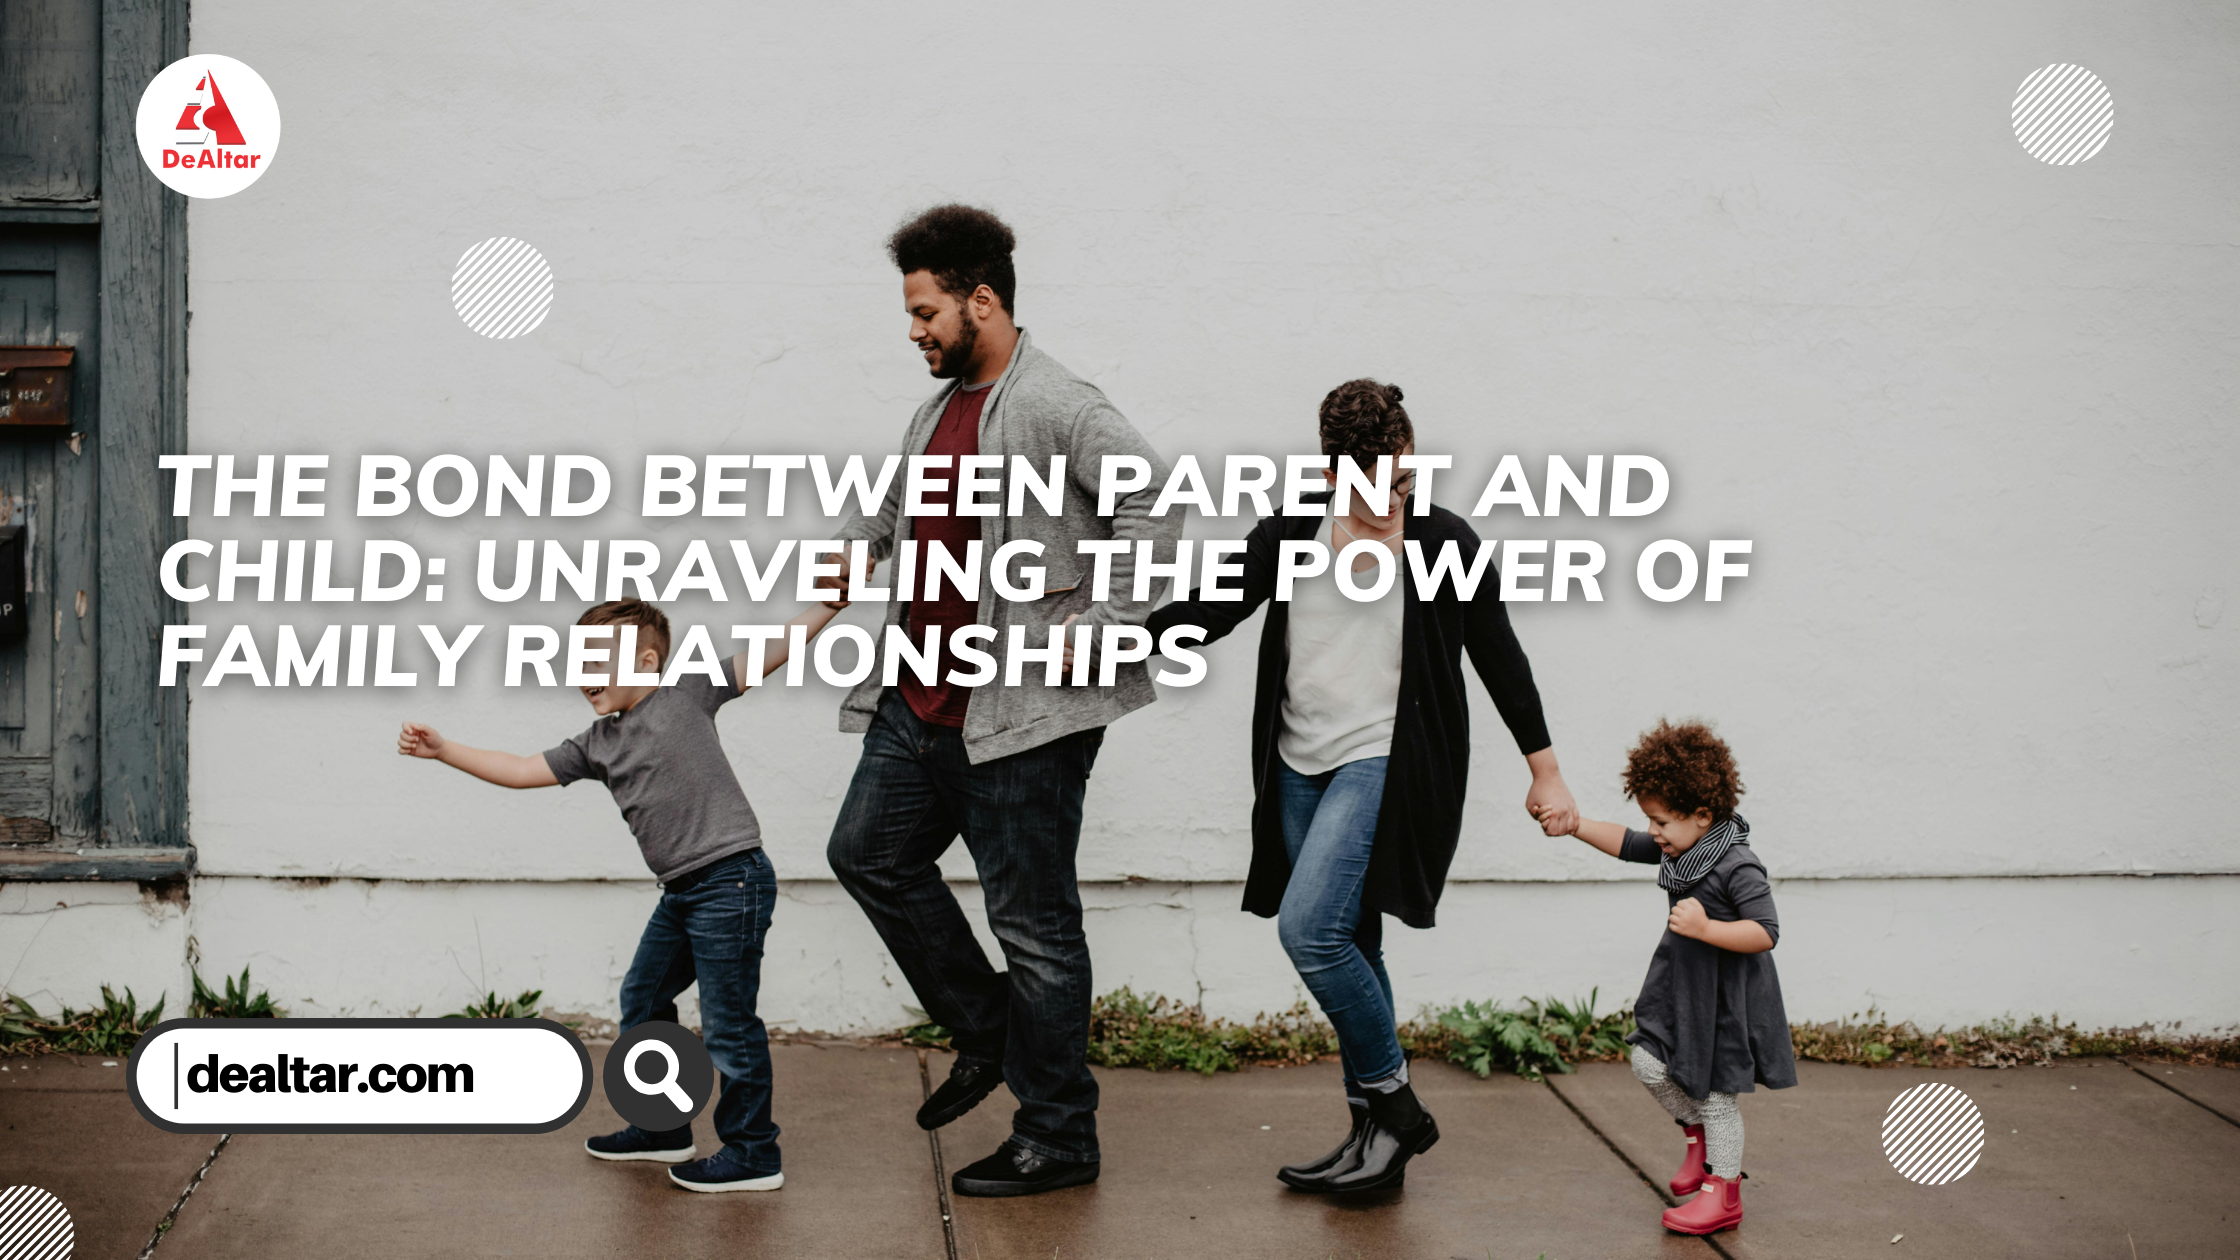 The Bond between Parent and Child: Unraveling the Power of Family Relationships